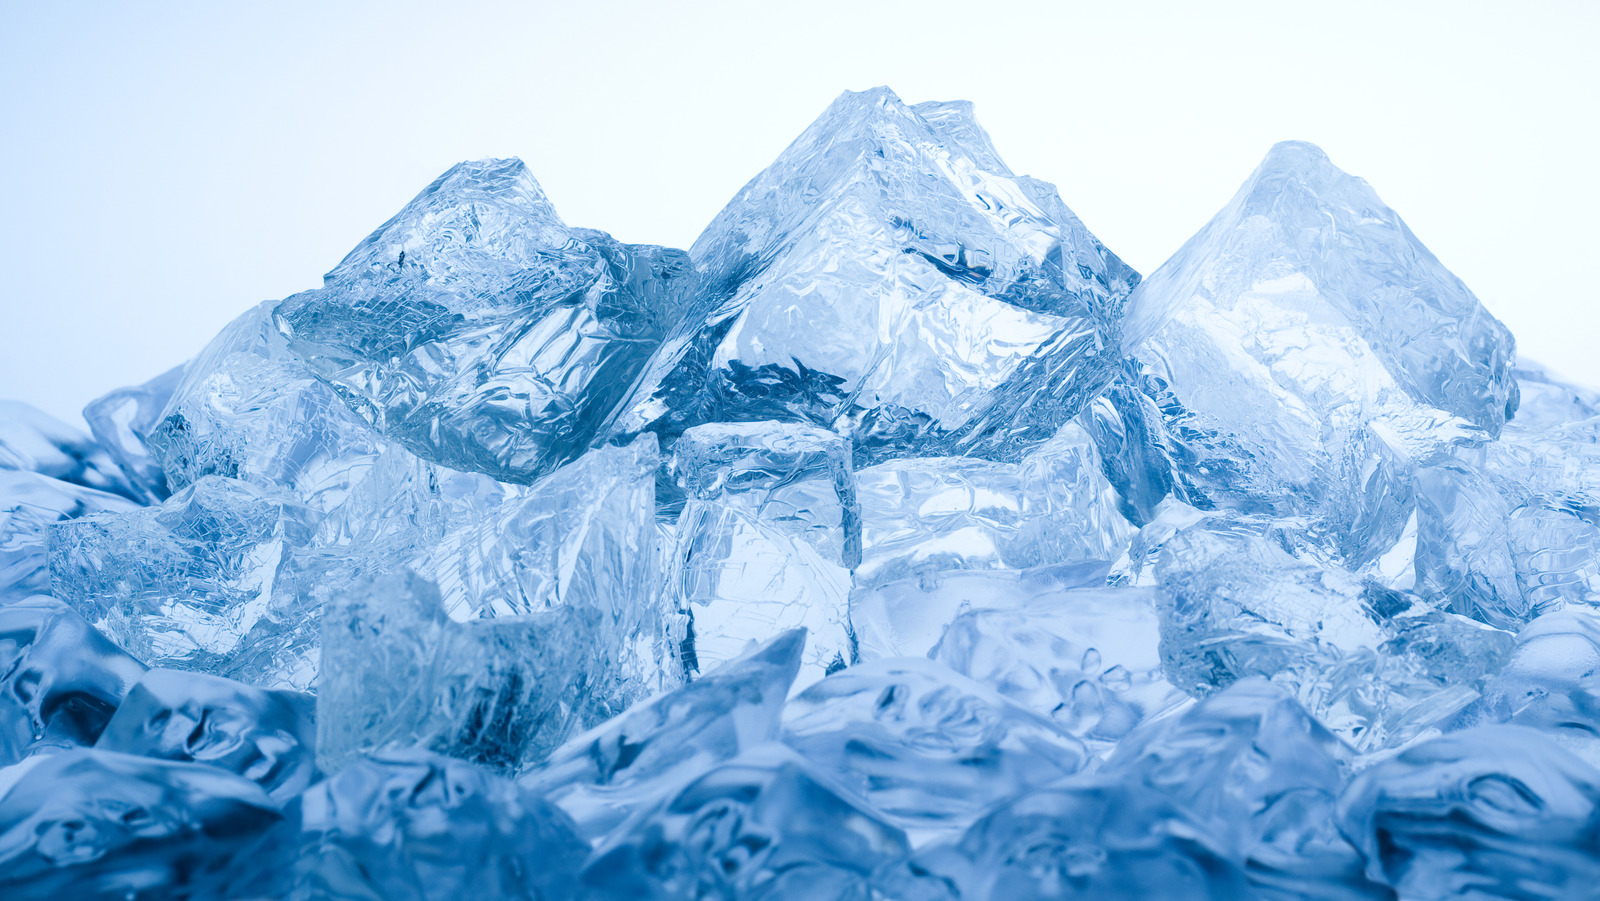 What's the Best Way To Make Really Big Ice Cubes?